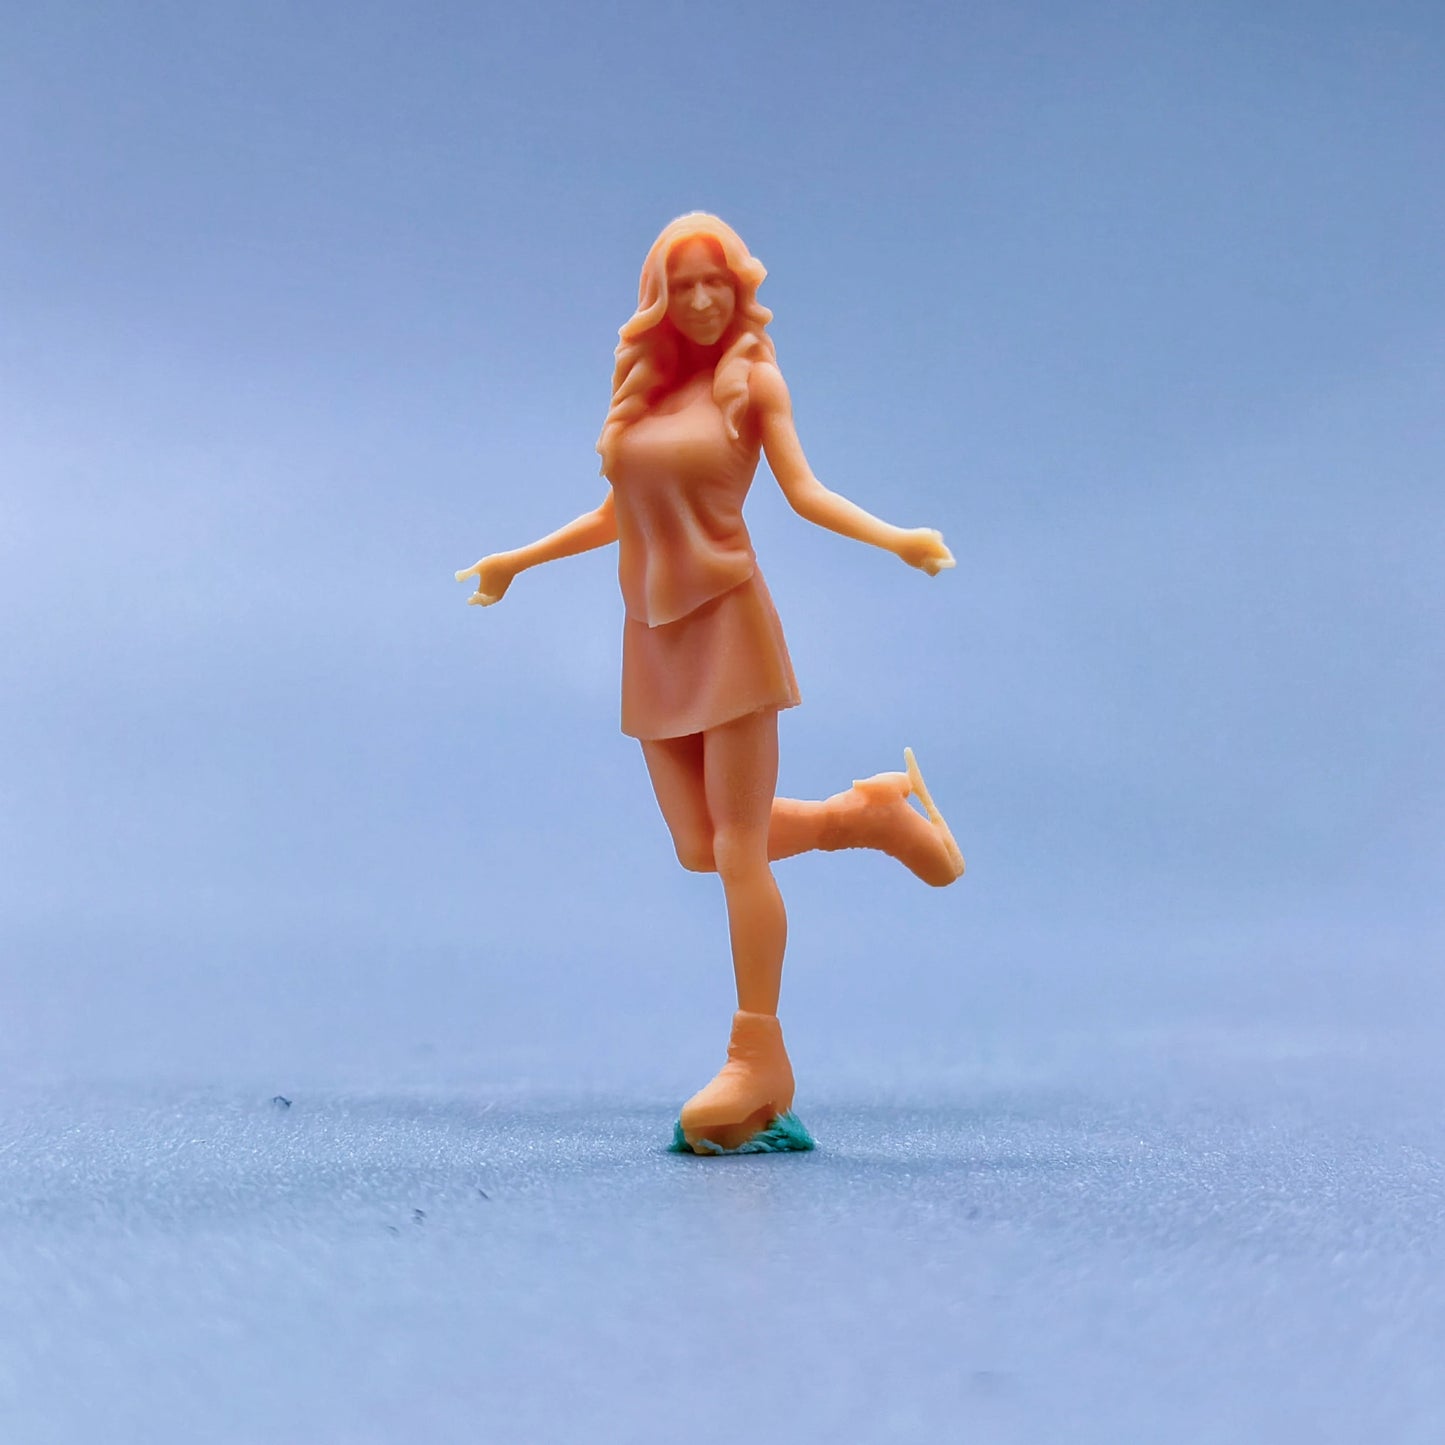 1/64 1/43 Figurines Scale Model Resin A Woman Wearing Ice Skates Uncolored Miniatures Diorama Hand-painted L226